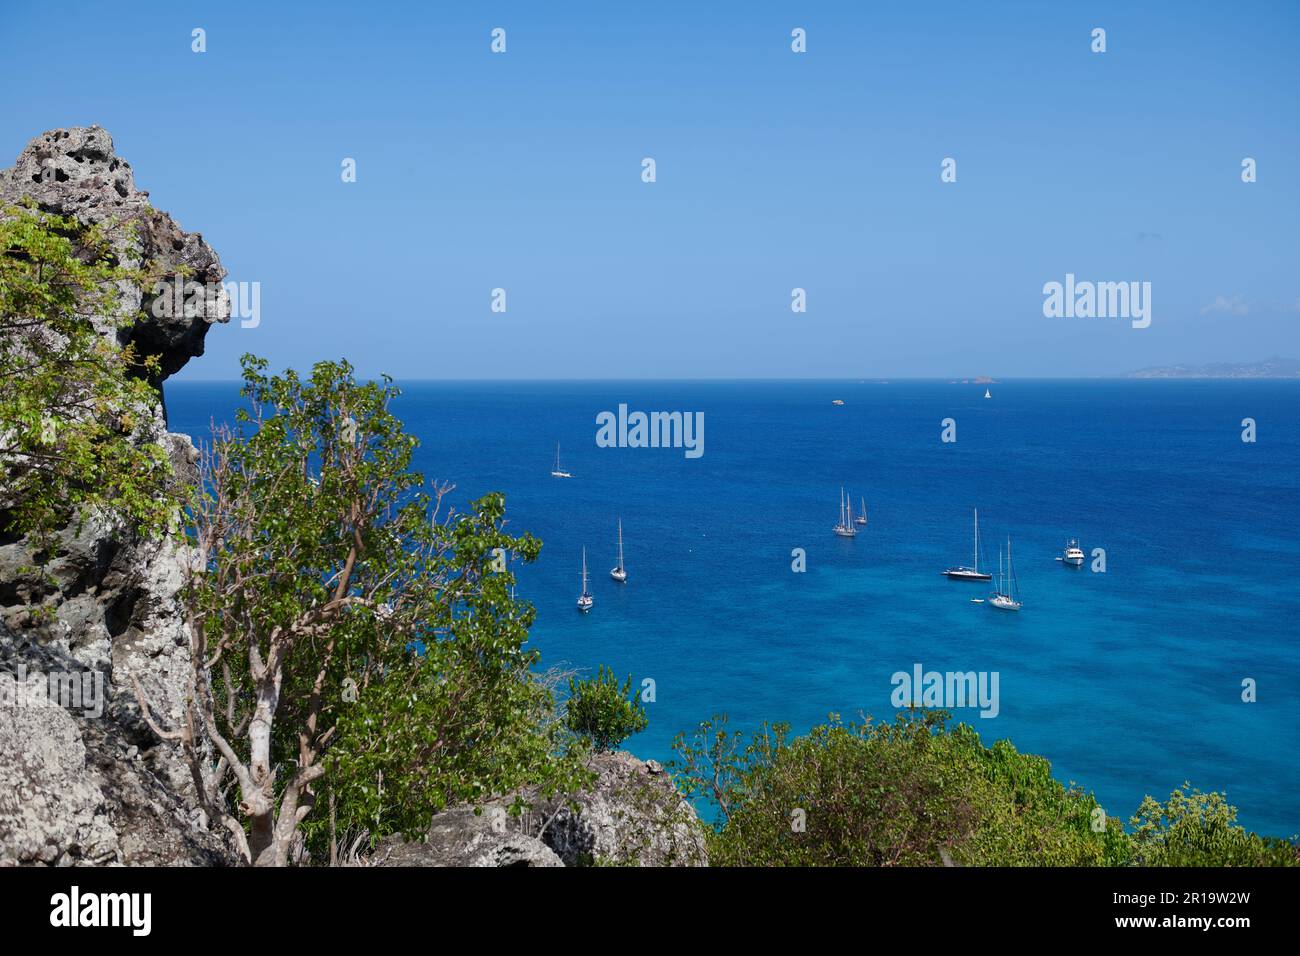 A view of Colombier beach on the island of St Barthelemy Stock Photo